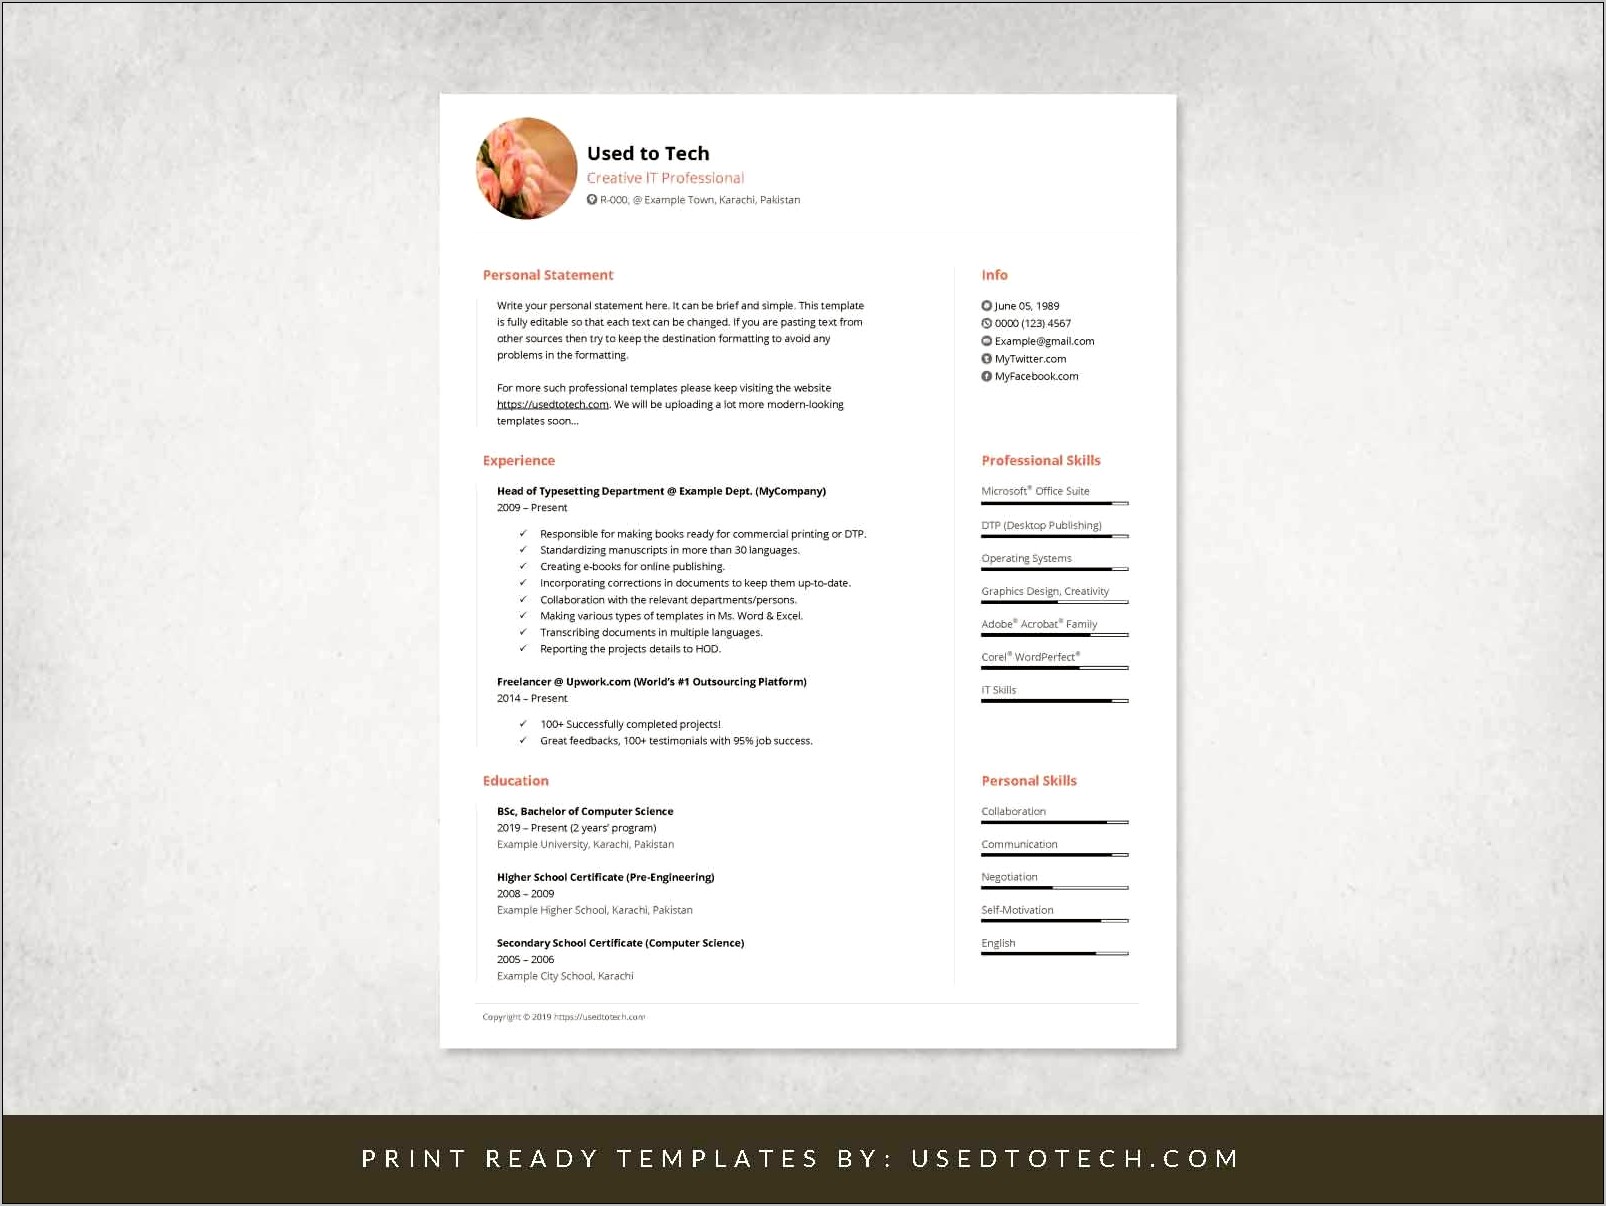 Example Of Resume With Adobe Pro